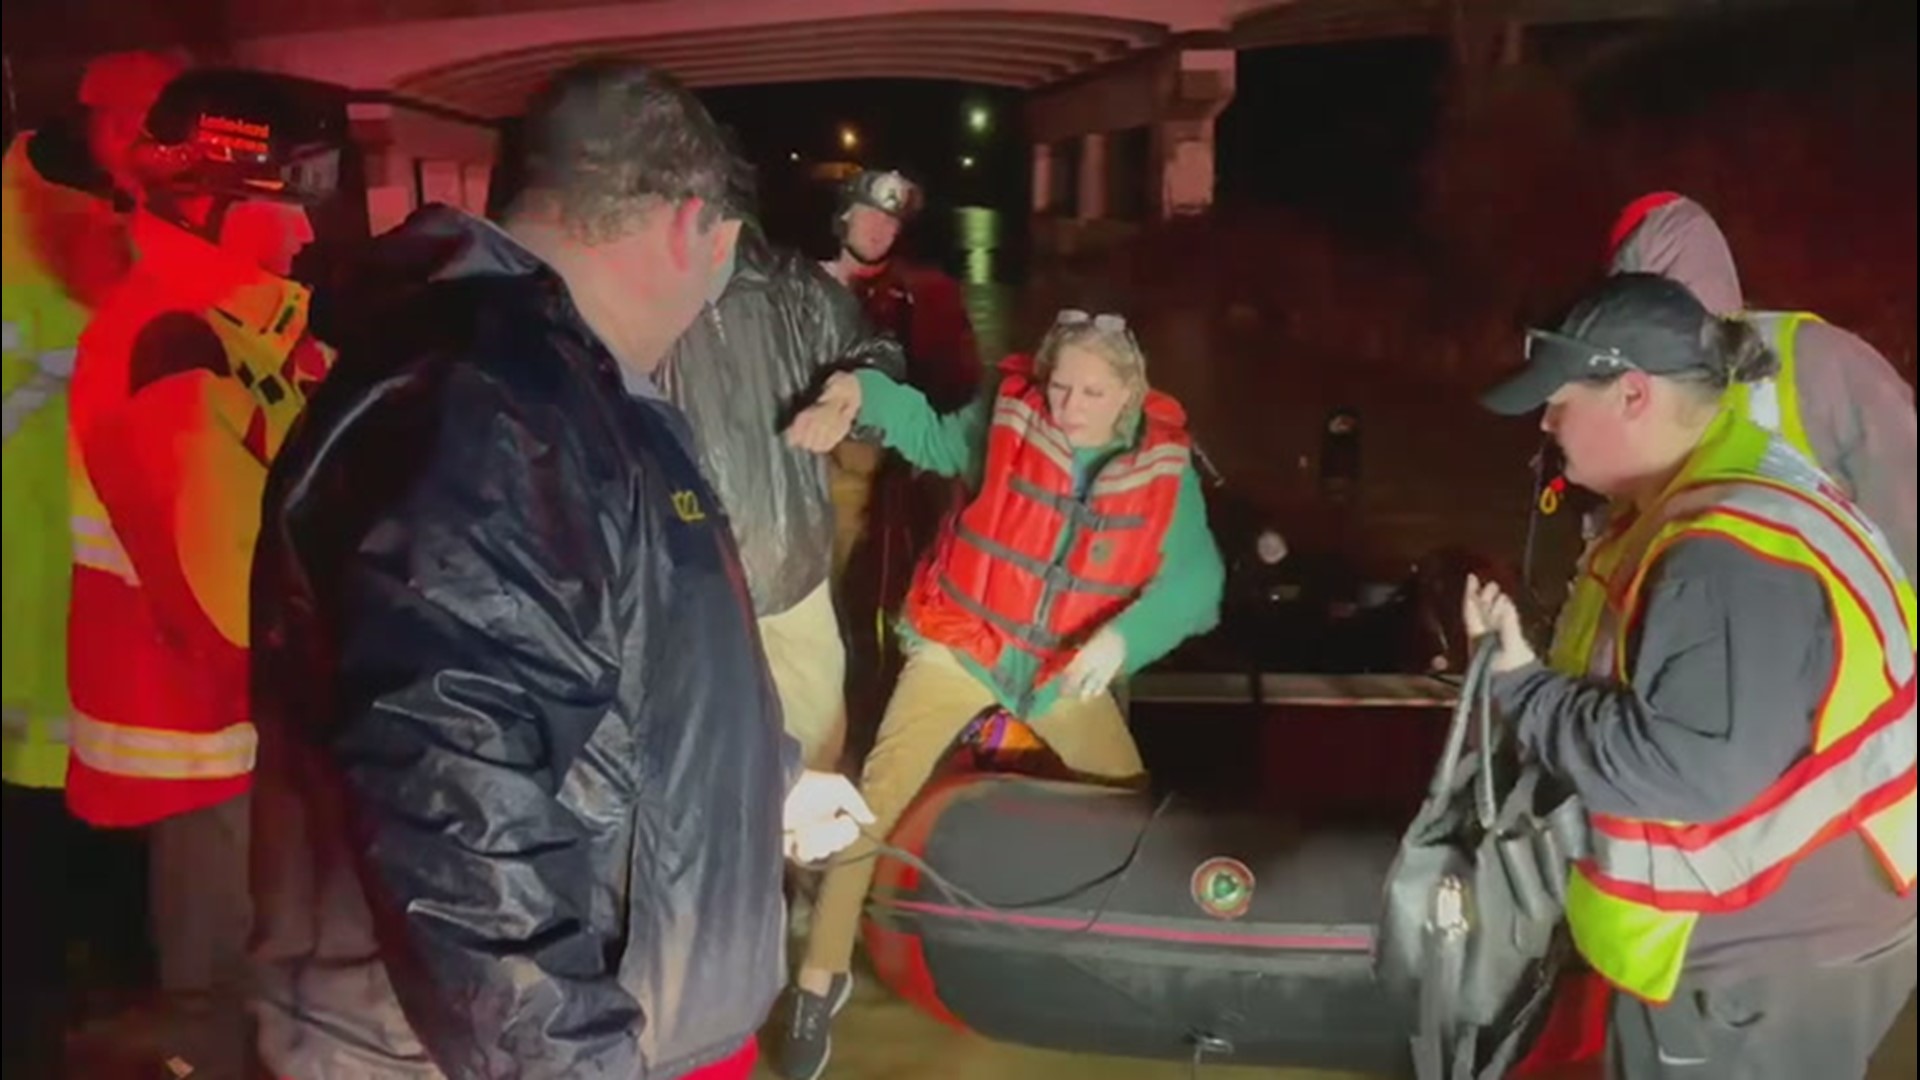 Flash flooding swept through parts of eastern Kentucky on Feb. 28, due to the effects of heavy rainfall in London. This woman was rescued on a raft amidst the flooding.